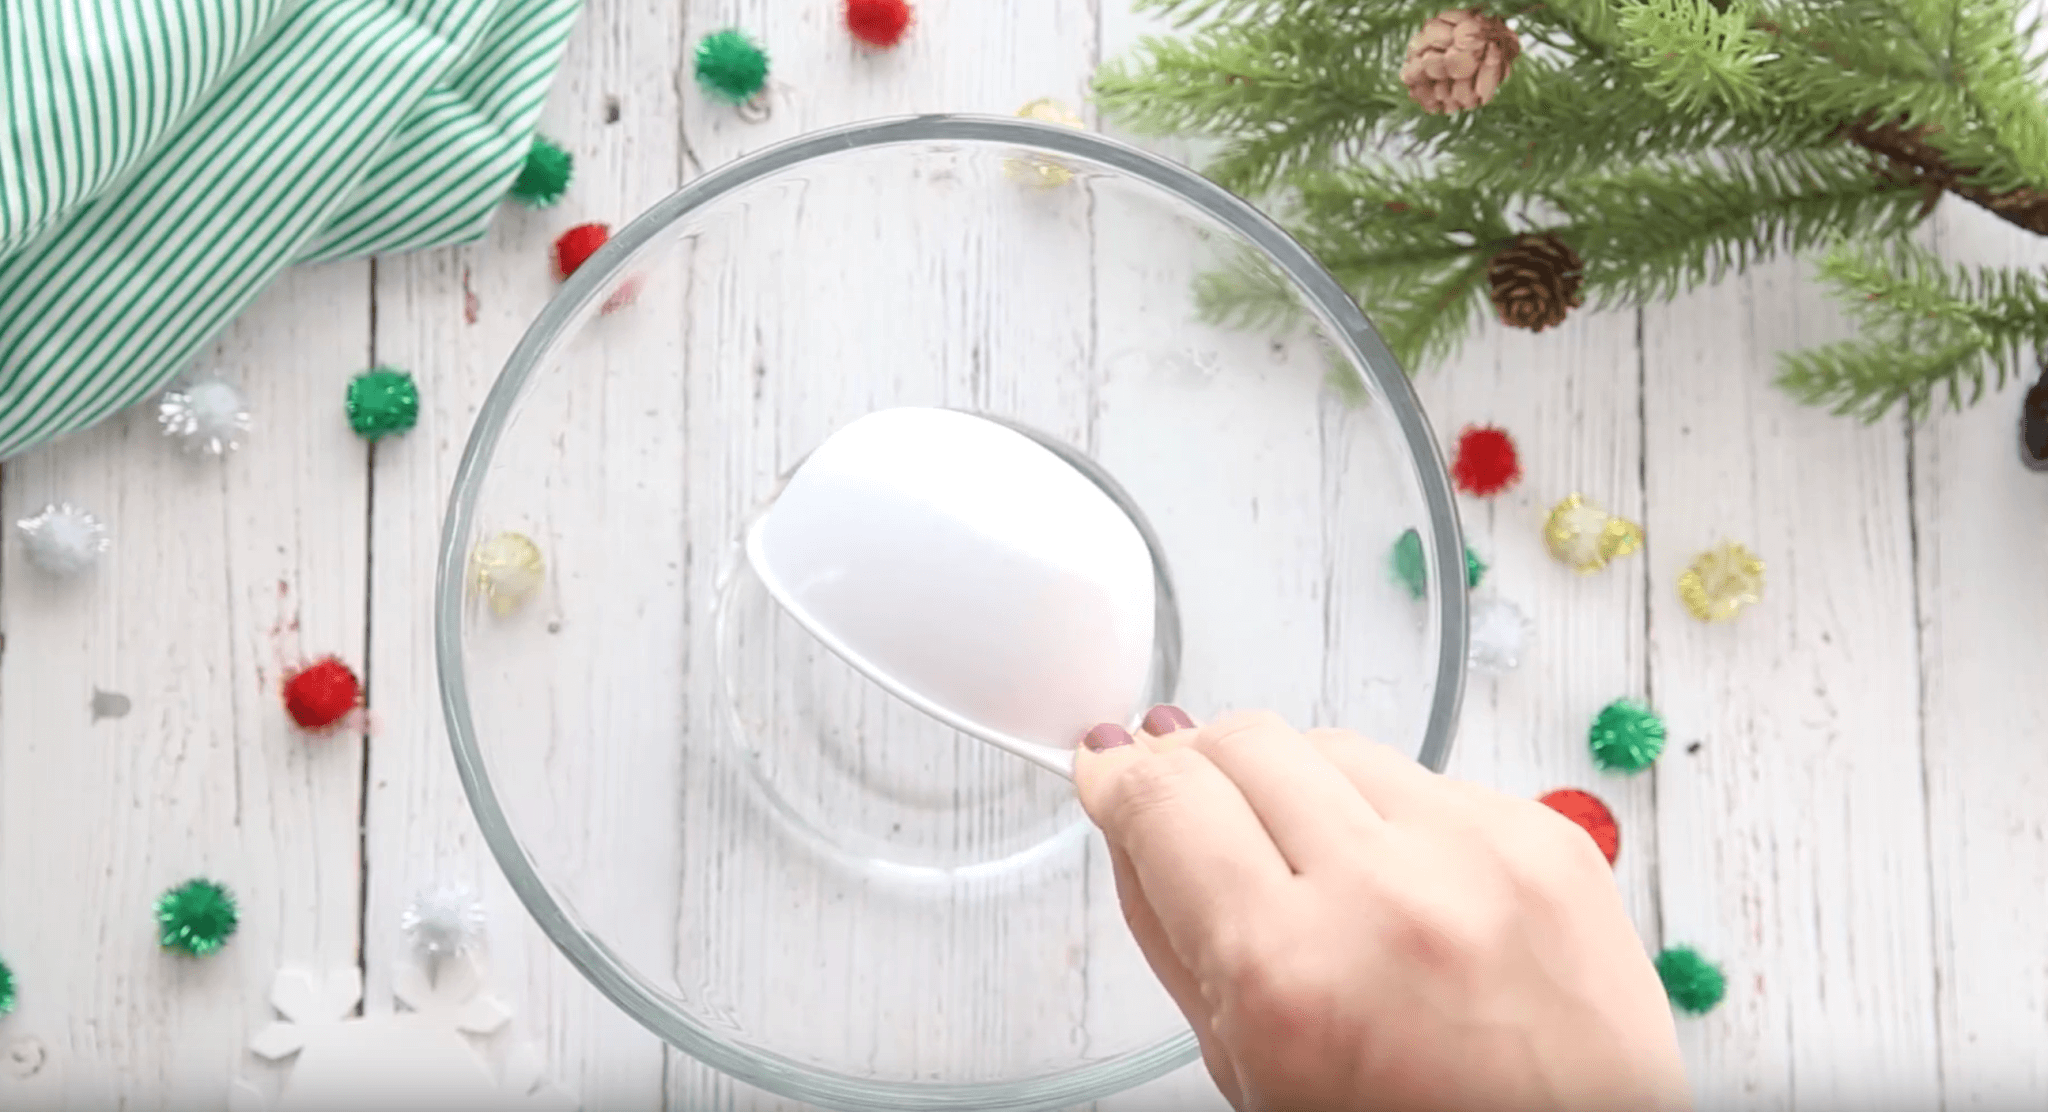 kids science experiments